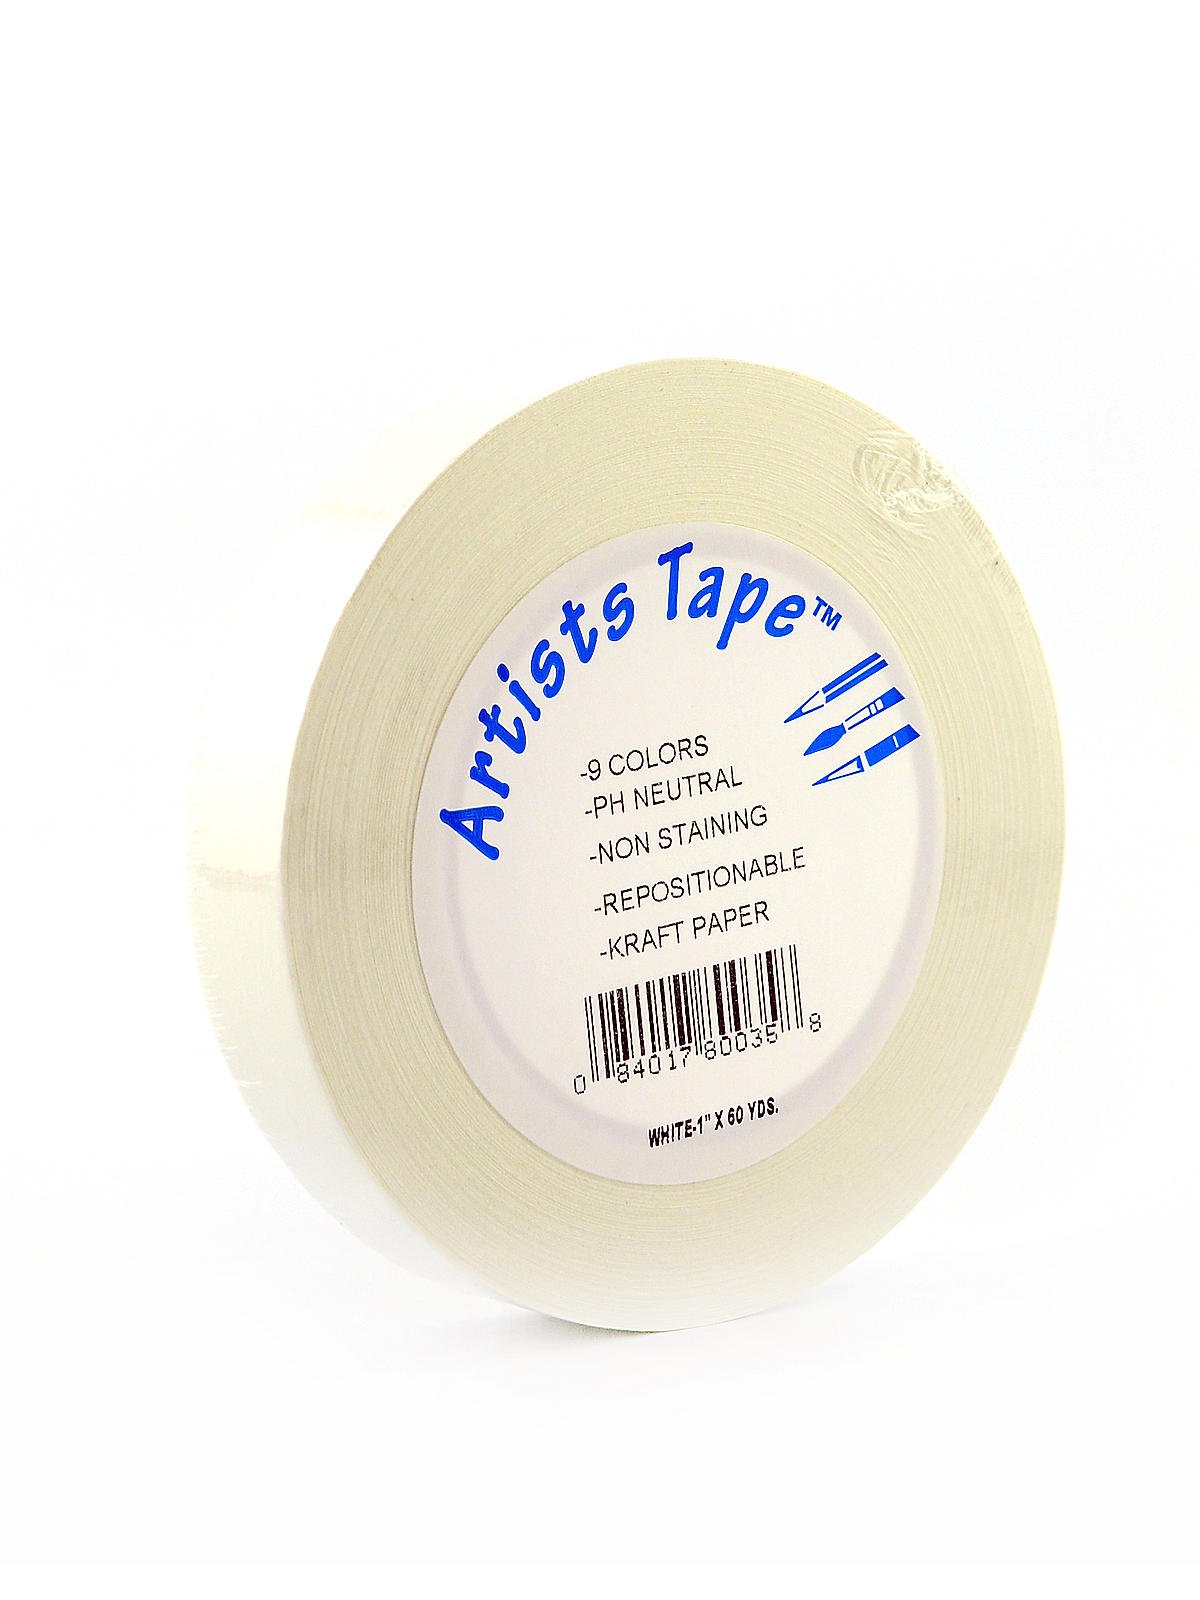 TSSART White Artist Tape Pro - Low Tack Masking Artists Tape for Drafting  Art Watercolor Painting and All Paper Media - Acid Free 1inch Wide 180FT